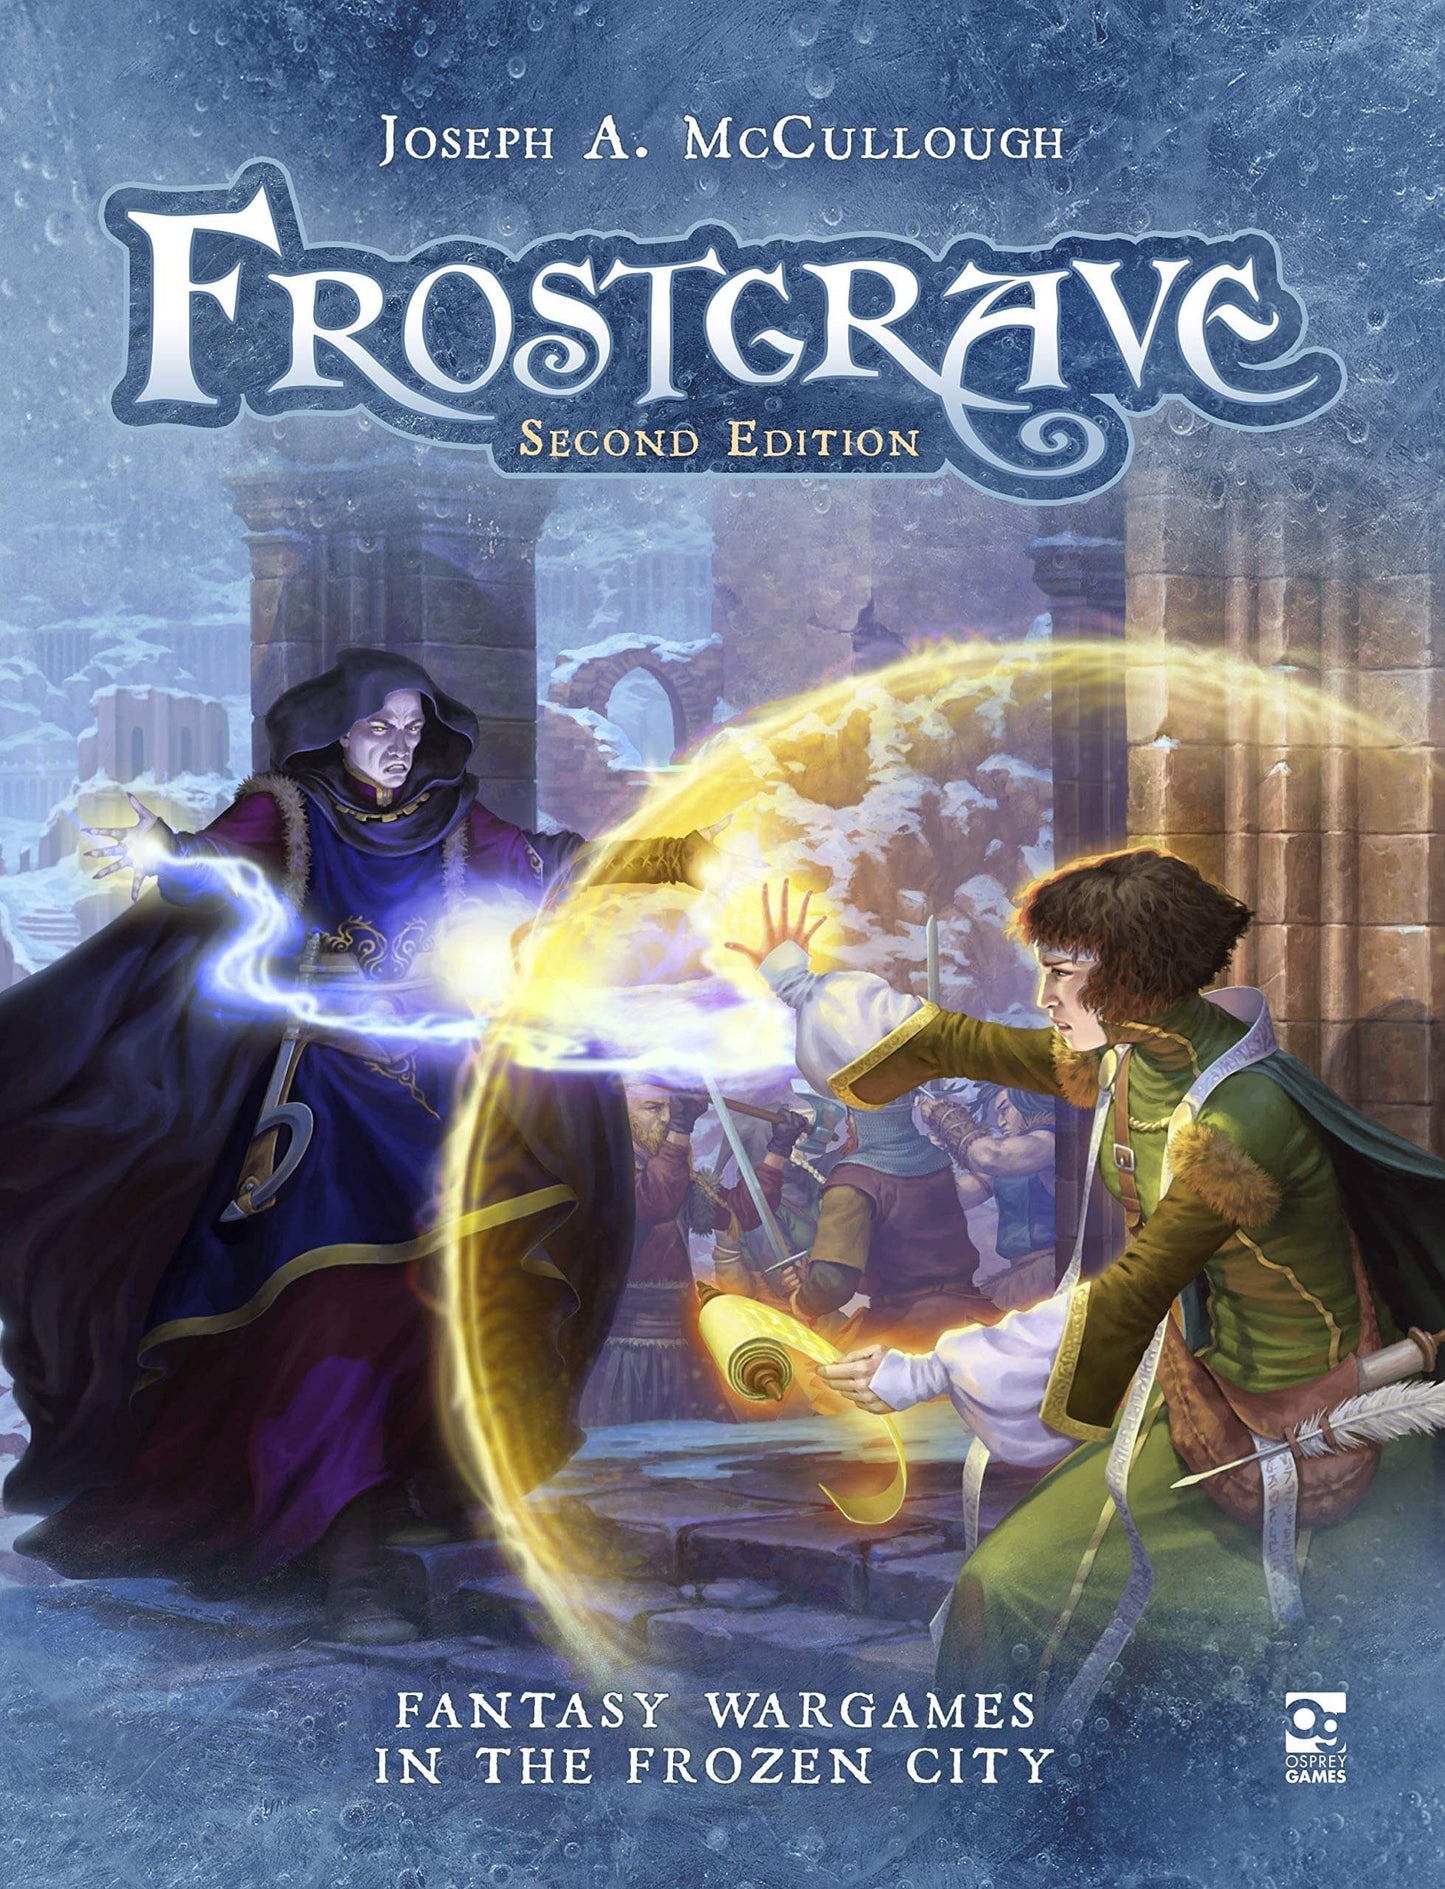 Frostgrave: Second Edition: Fantasy Wargames in the Frozen City Hardcover Book– August 18, 2020 28mm Fantasy miniatures Great for Dungeons & Dragons